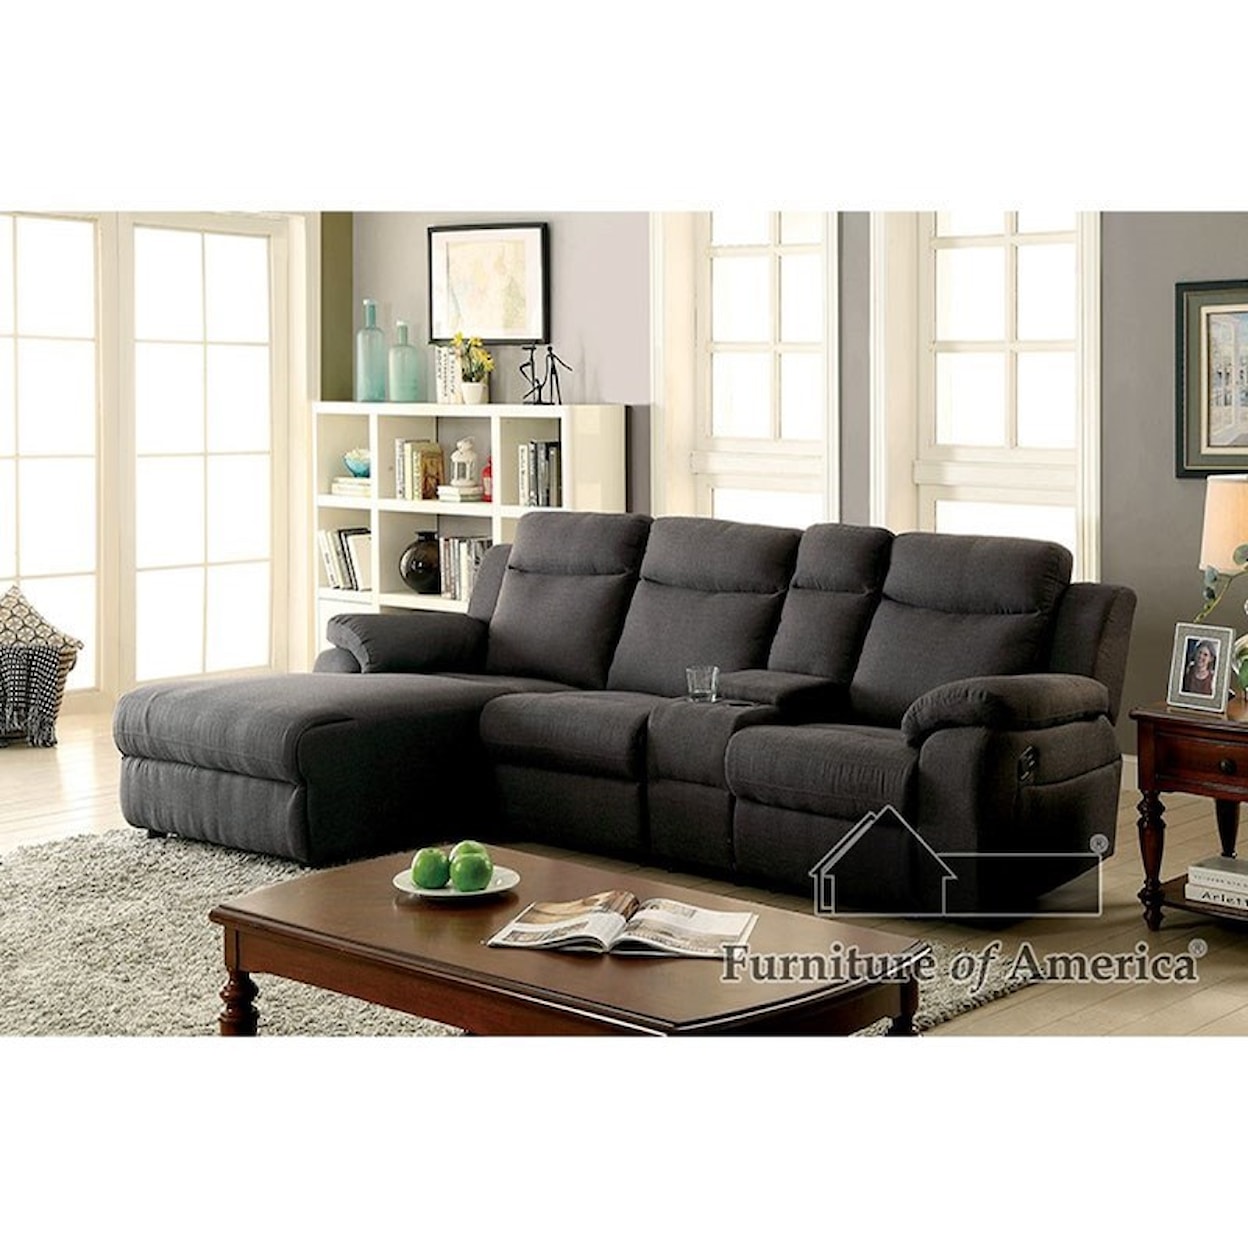 Furniture of America Kamryn Sectional w/ Console